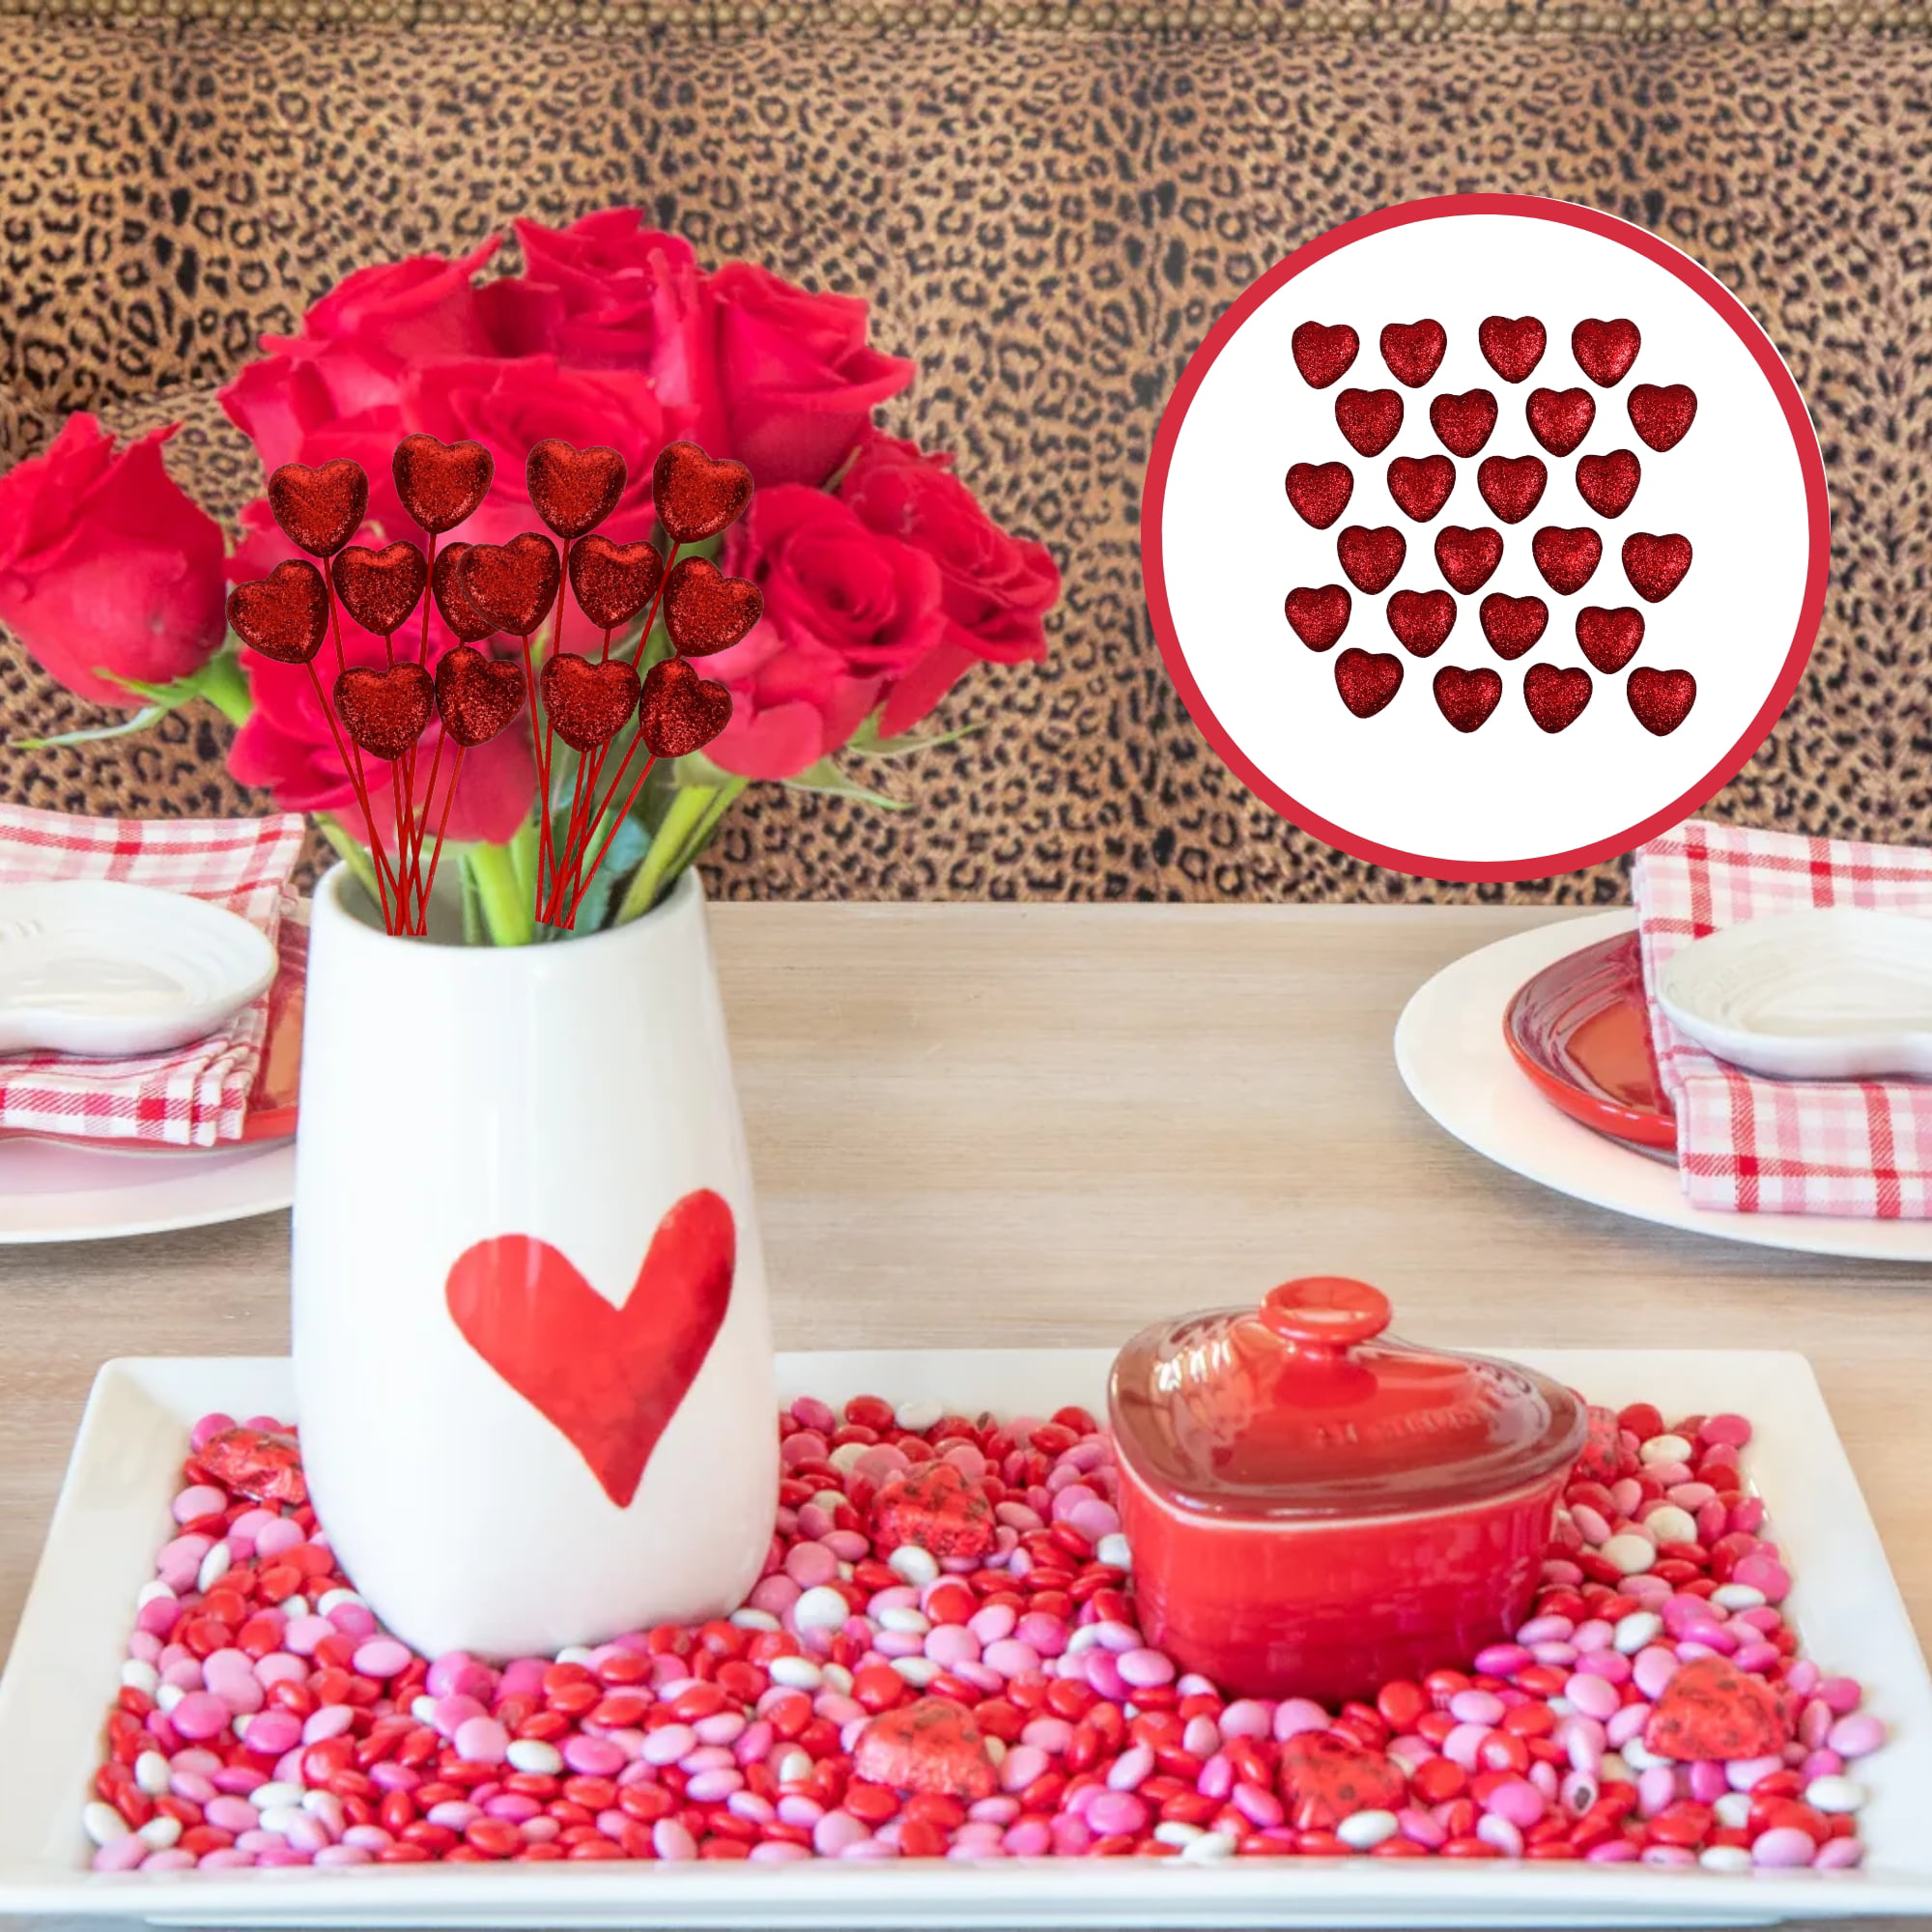 Red Heart Acrylic Vase Fillers Table Scatters for Valentines Mothers Day